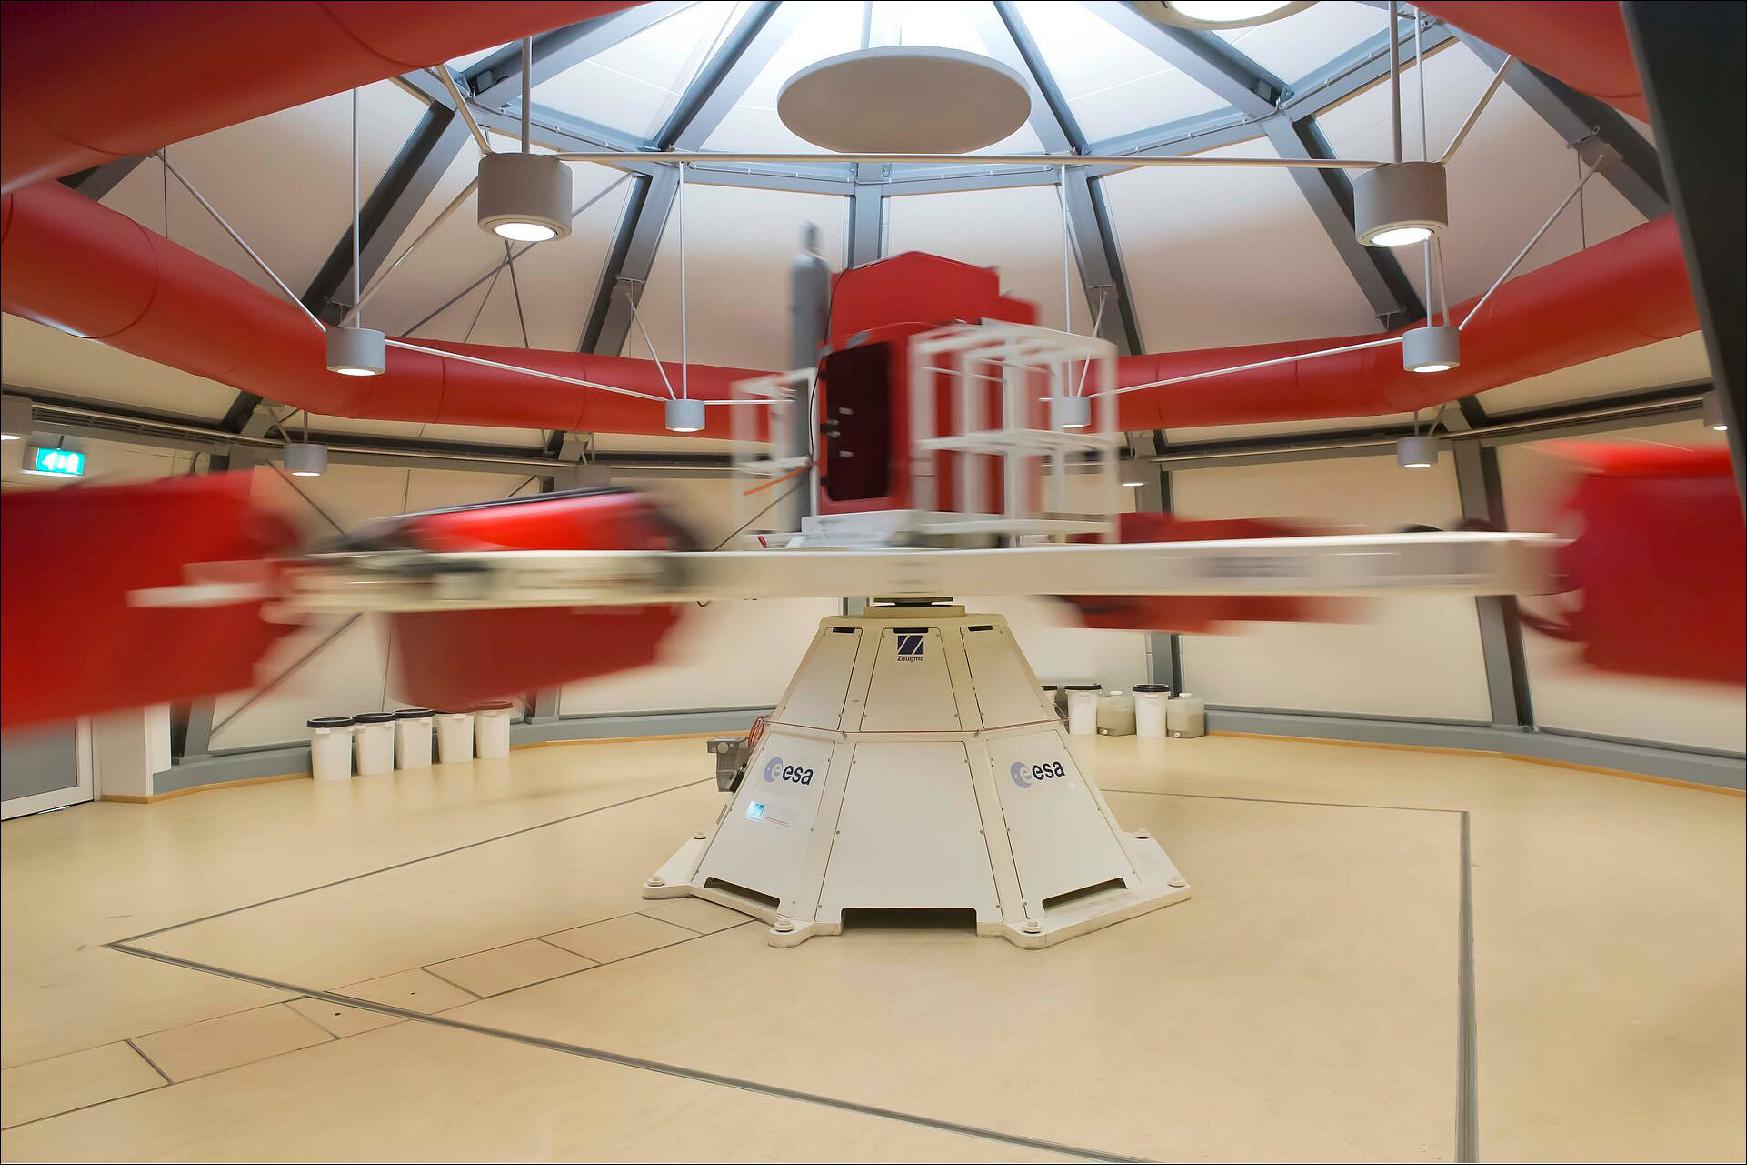 Figure 106: ESA's Large Diameter Centrifuge at the Agency's technical heart in the Netherlands is seen running here at full speed. The 8-m diameter four-arm centrifuge gives researchers access to a range of hypergravity environments up to 20 times Earth's gravity for weeks or months at a time. At its fastest, the centrifuge rotates at up to 67 revs per minute, with its six gondolas placed at different points along its arms weighing in at 130 kg, and each capable of accommodating 80 kg of payload. (image credit: ESA –A. Le Floc'h)